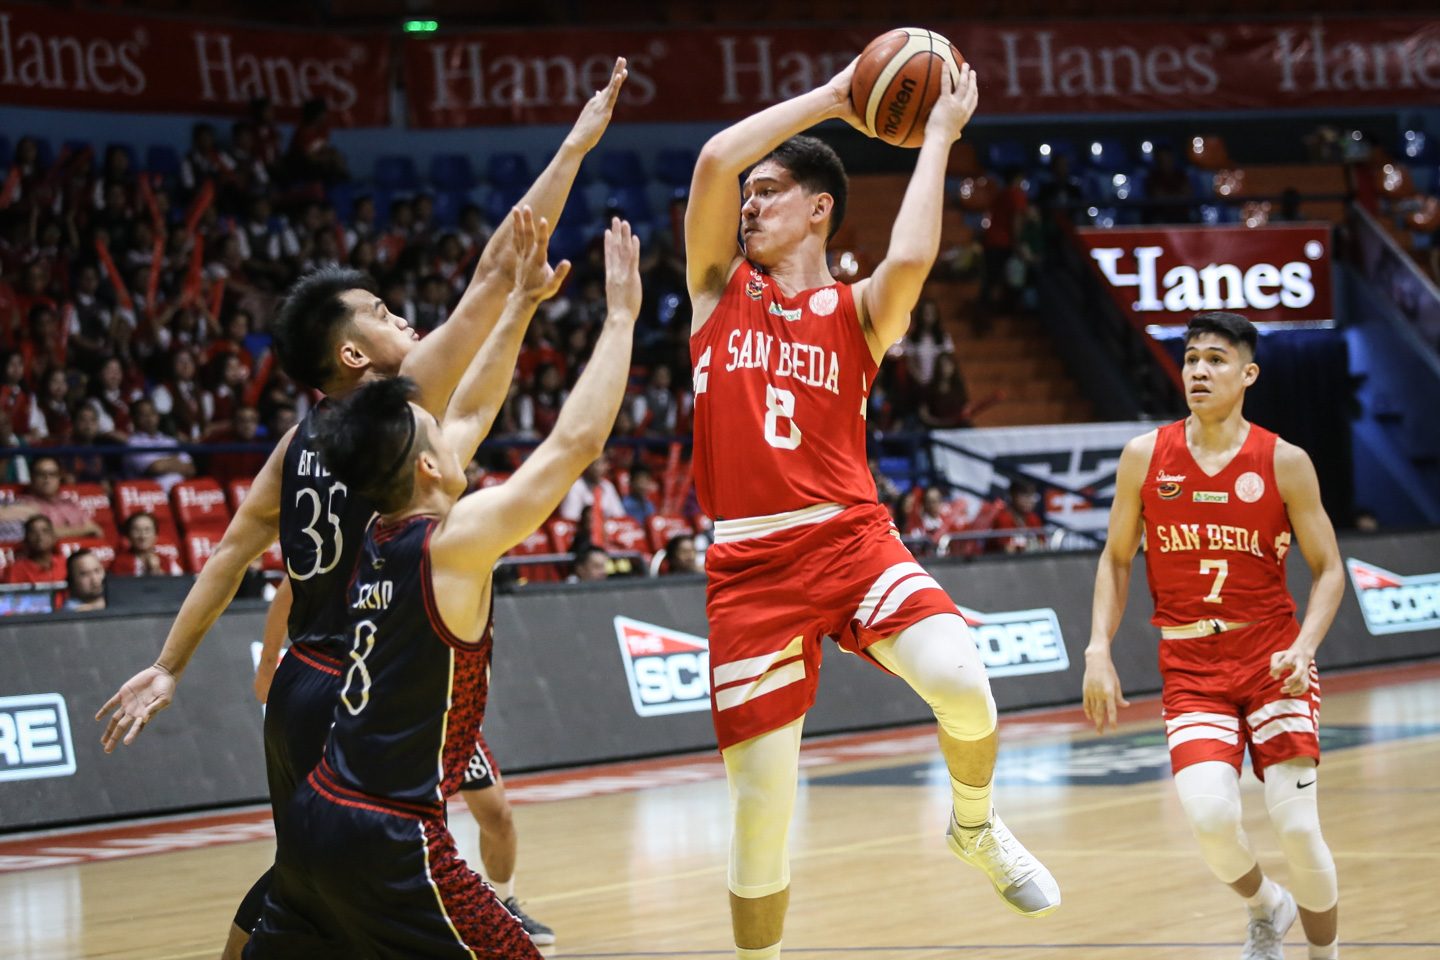 San Beda denies late Letran surge, sweeps Knights in rematch